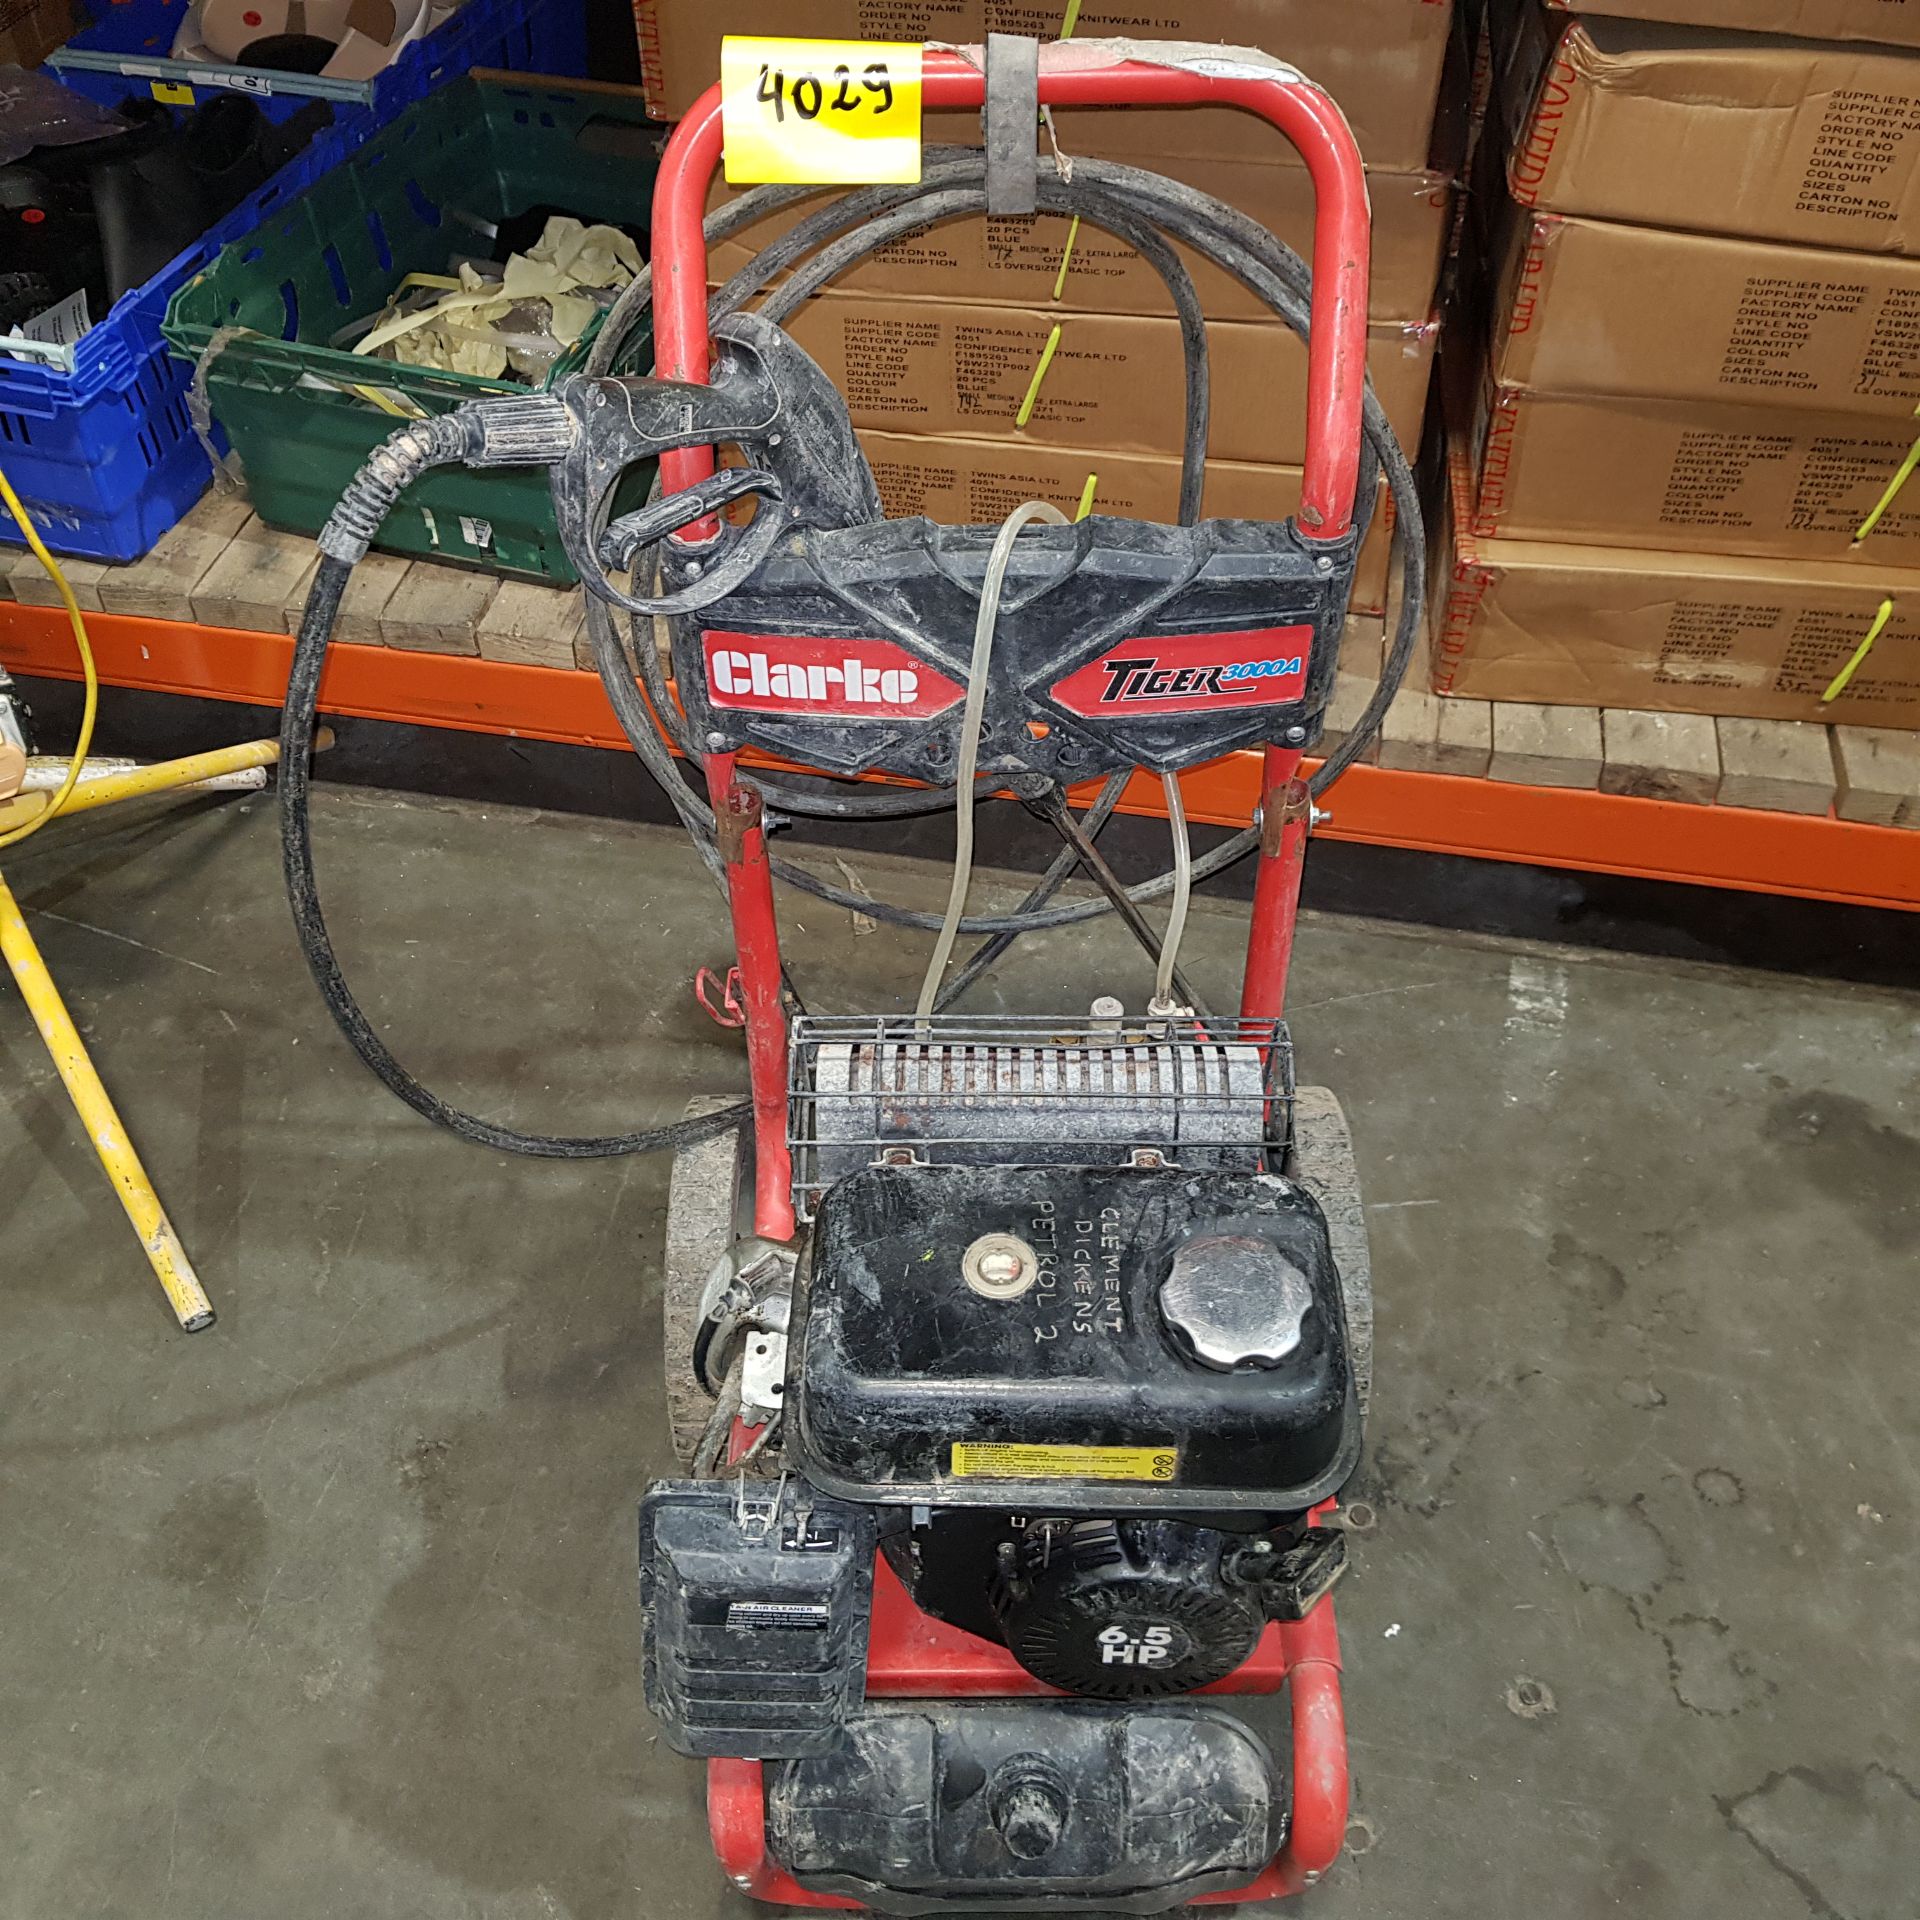 1 X CLARKE TIGER 3000A PETROL ENGINE 6.5 HP - PRESSURE WASHER ( TESTED , TURNS ON )